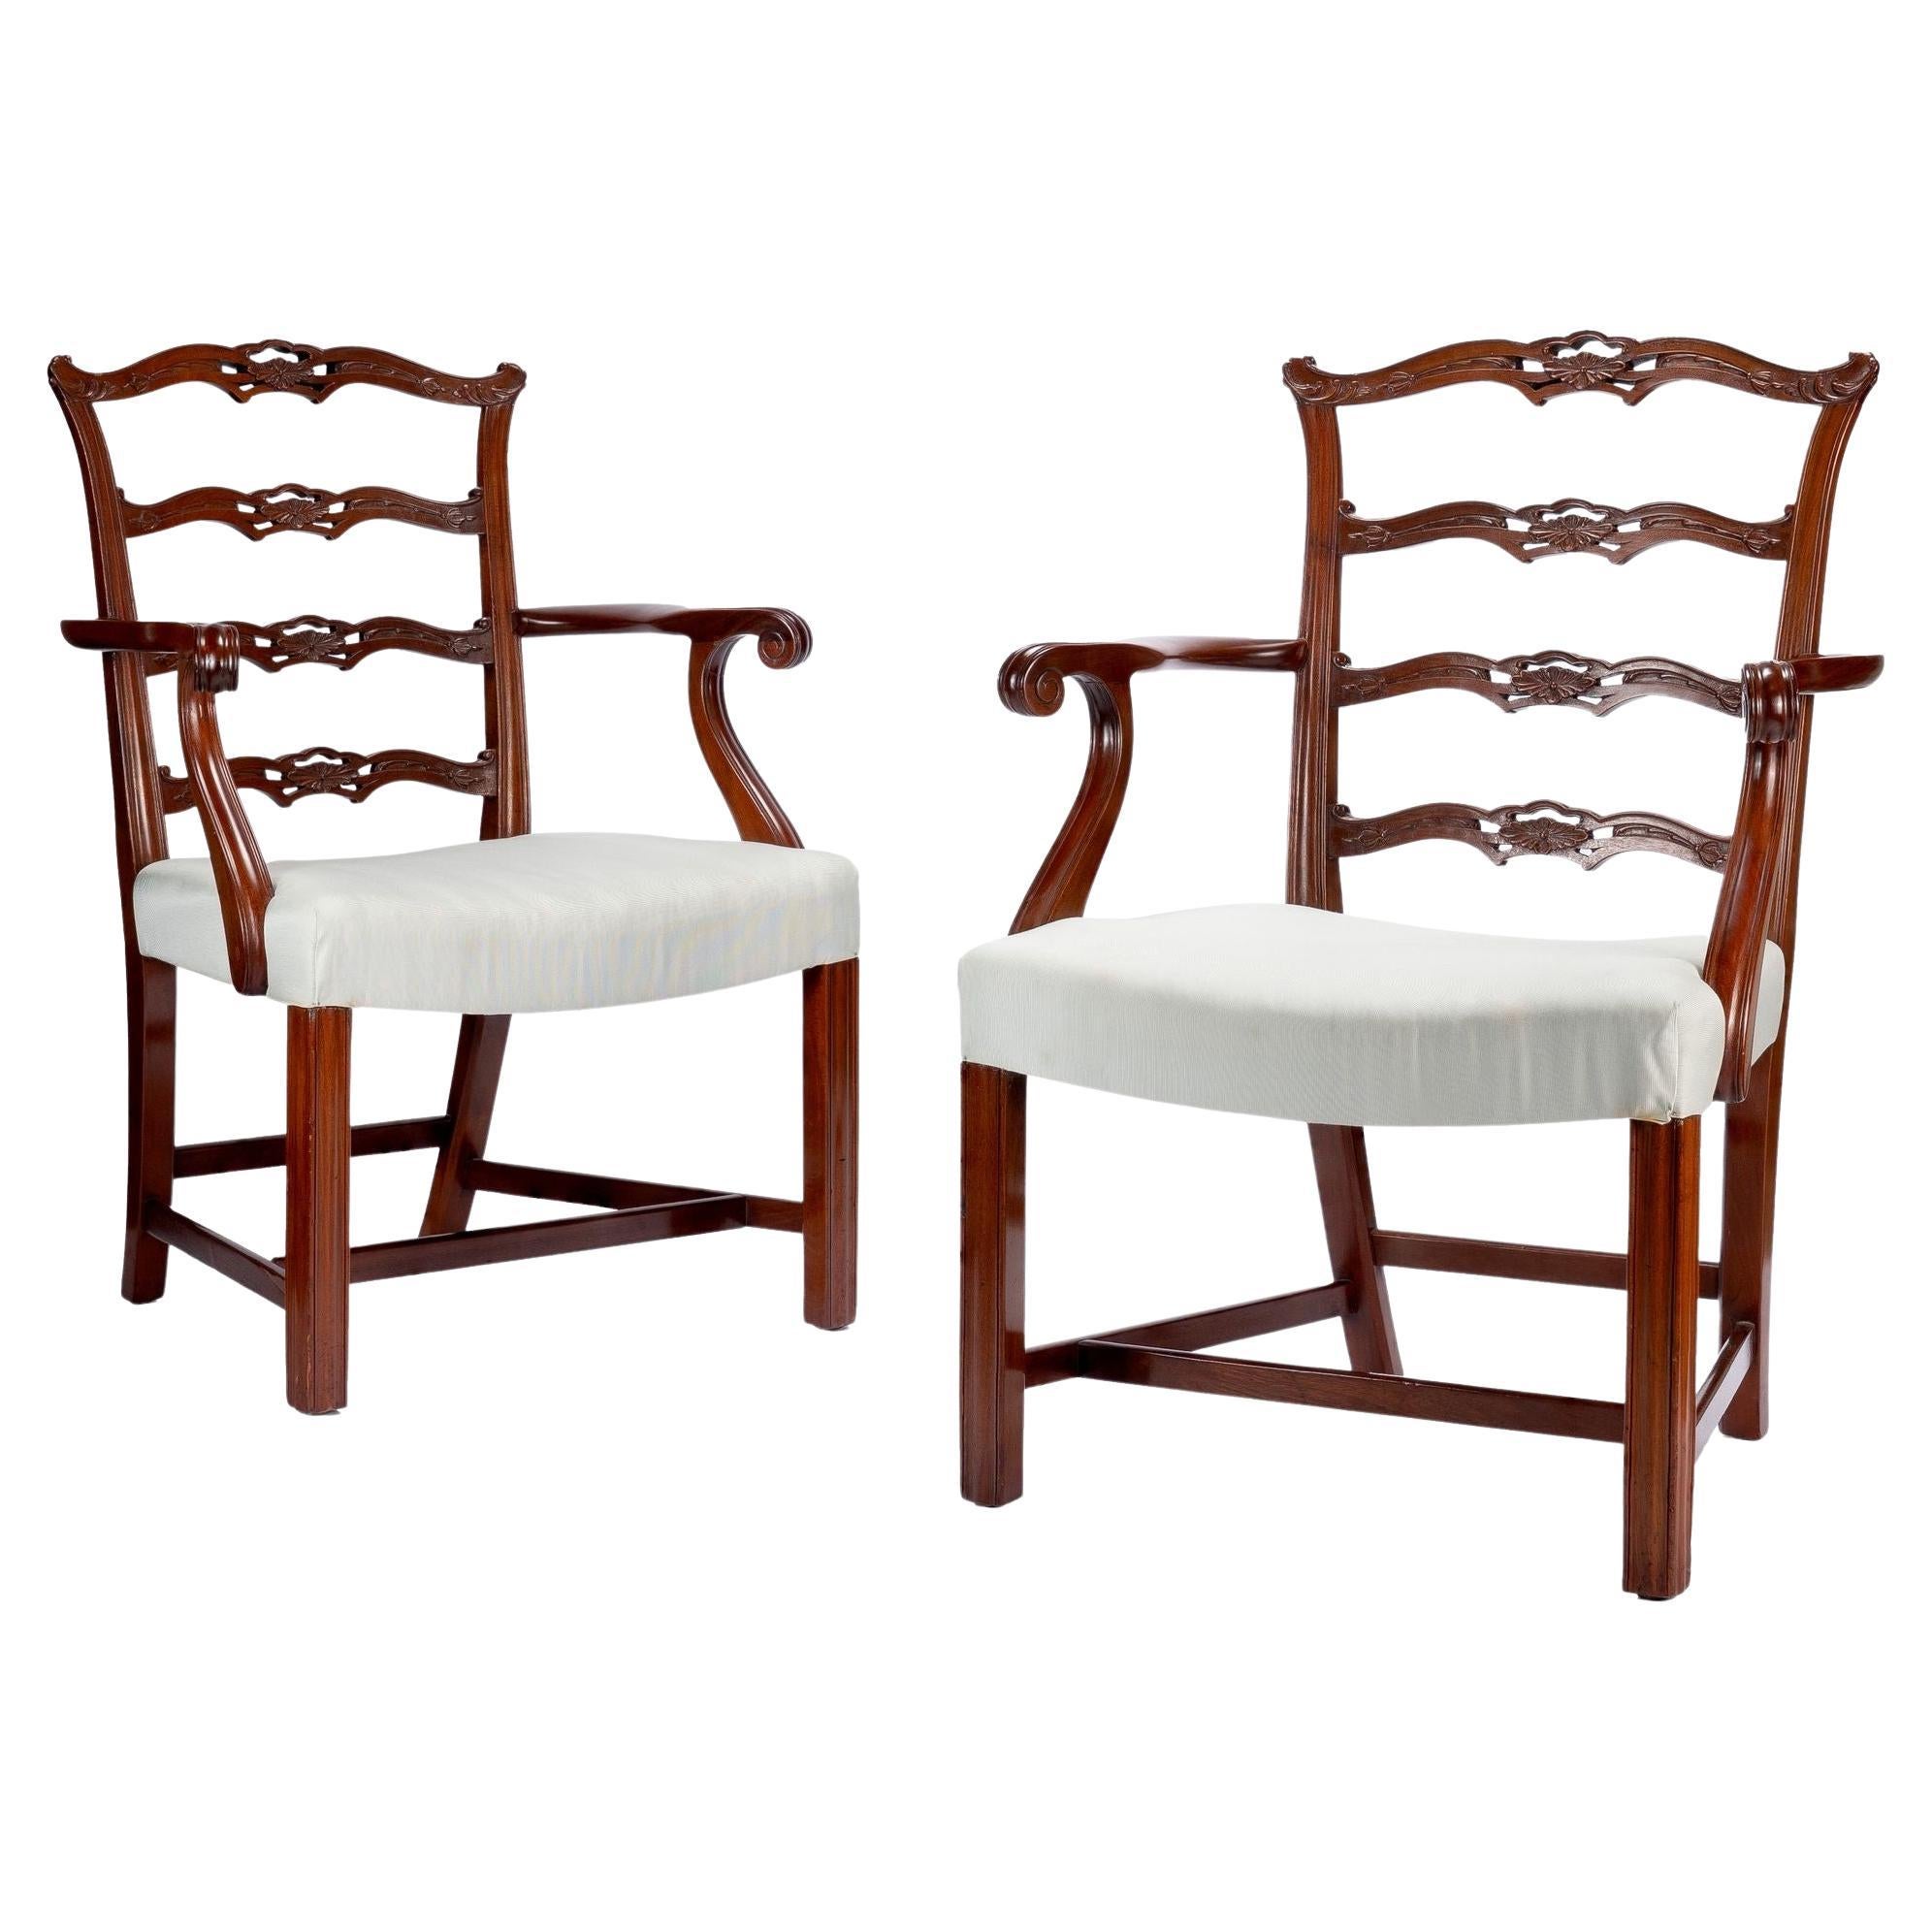 Pair of Chippendale style ladder back arm chairs, c. 1930-40